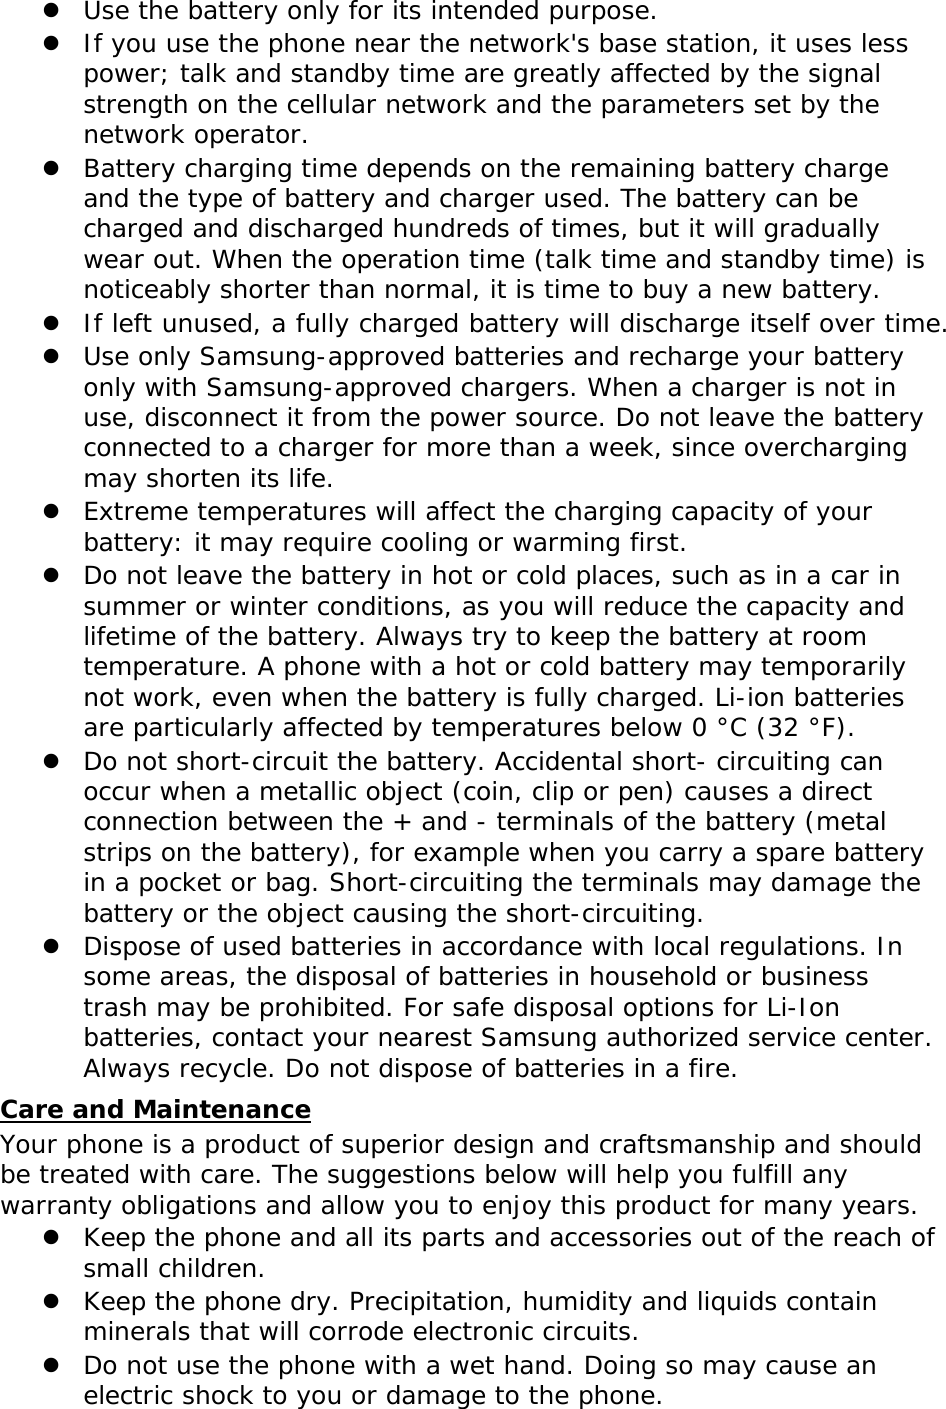 z Use the battery only for its intended purpose. z If you use the phone near the network&apos;s base station, it uses less power; talk and standby time are greatly affected by the signal strength on the cellular network and the parameters set by the network operator. z Battery charging time depends on the remaining battery charge and the type of battery and charger used. The battery can be charged and discharged hundreds of times, but it will gradually wear out. When the operation time (talk time and standby time) is noticeably shorter than normal, it is time to buy a new battery. z If left unused, a fully charged battery will discharge itself over time. z Use only Samsung-approved batteries and recharge your battery only with Samsung-approved chargers. When a charger is not in use, disconnect it from the power source. Do not leave the battery connected to a charger for more than a week, since overcharging may shorten its life. z Extreme temperatures will affect the charging capacity of your battery: it may require cooling or warming first. z Do not leave the battery in hot or cold places, such as in a car in summer or winter conditions, as you will reduce the capacity and lifetime of the battery. Always try to keep the battery at room temperature. A phone with a hot or cold battery may temporarily not work, even when the battery is fully charged. Li-ion batteries are particularly affected by temperatures below 0 °C (32 °F). z Do not short-circuit the battery. Accidental short- circuiting can occur when a metallic object (coin, clip or pen) causes a direct connection between the + and - terminals of the battery (metal strips on the battery), for example when you carry a spare battery in a pocket or bag. Short-circuiting the terminals may damage the battery or the object causing the short-circuiting. z Dispose of used batteries in accordance with local regulations. In some areas, the disposal of batteries in household or business trash may be prohibited. For safe disposal options for Li-Ion batteries, contact your nearest Samsung authorized service center. Always recycle. Do not dispose of batteries in a fire. Care and Maintenance Your phone is a product of superior design and craftsmanship and should be treated with care. The suggestions below will help you fulfill any warranty obligations and allow you to enjoy this product for many years. z Keep the phone and all its parts and accessories out of the reach of small children. z Keep the phone dry. Precipitation, humidity and liquids contain minerals that will corrode electronic circuits. z Do not use the phone with a wet hand. Doing so may cause an electric shock to you or damage to the phone. 